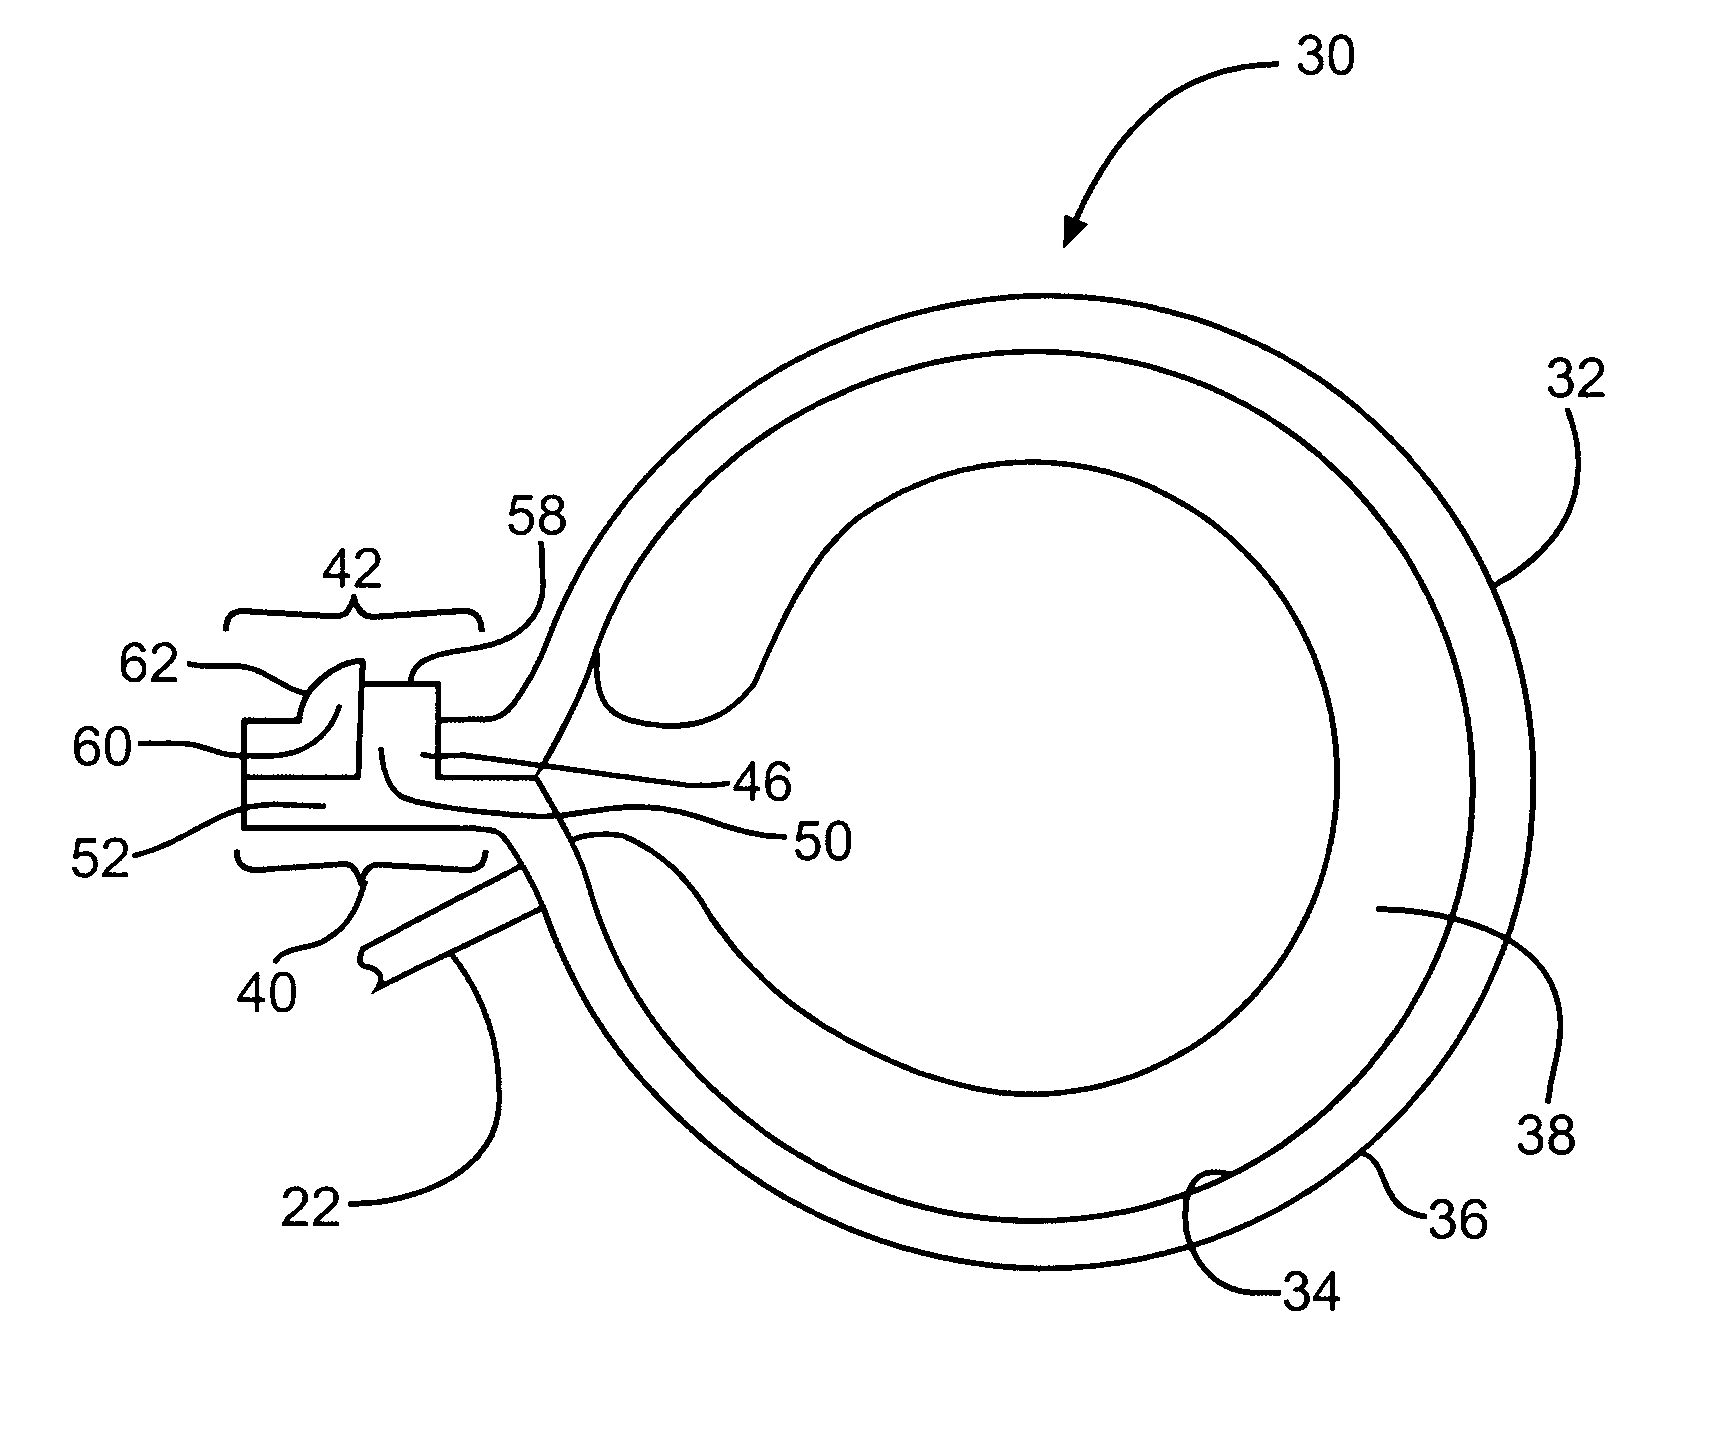 Implantable band with attachment mechanism